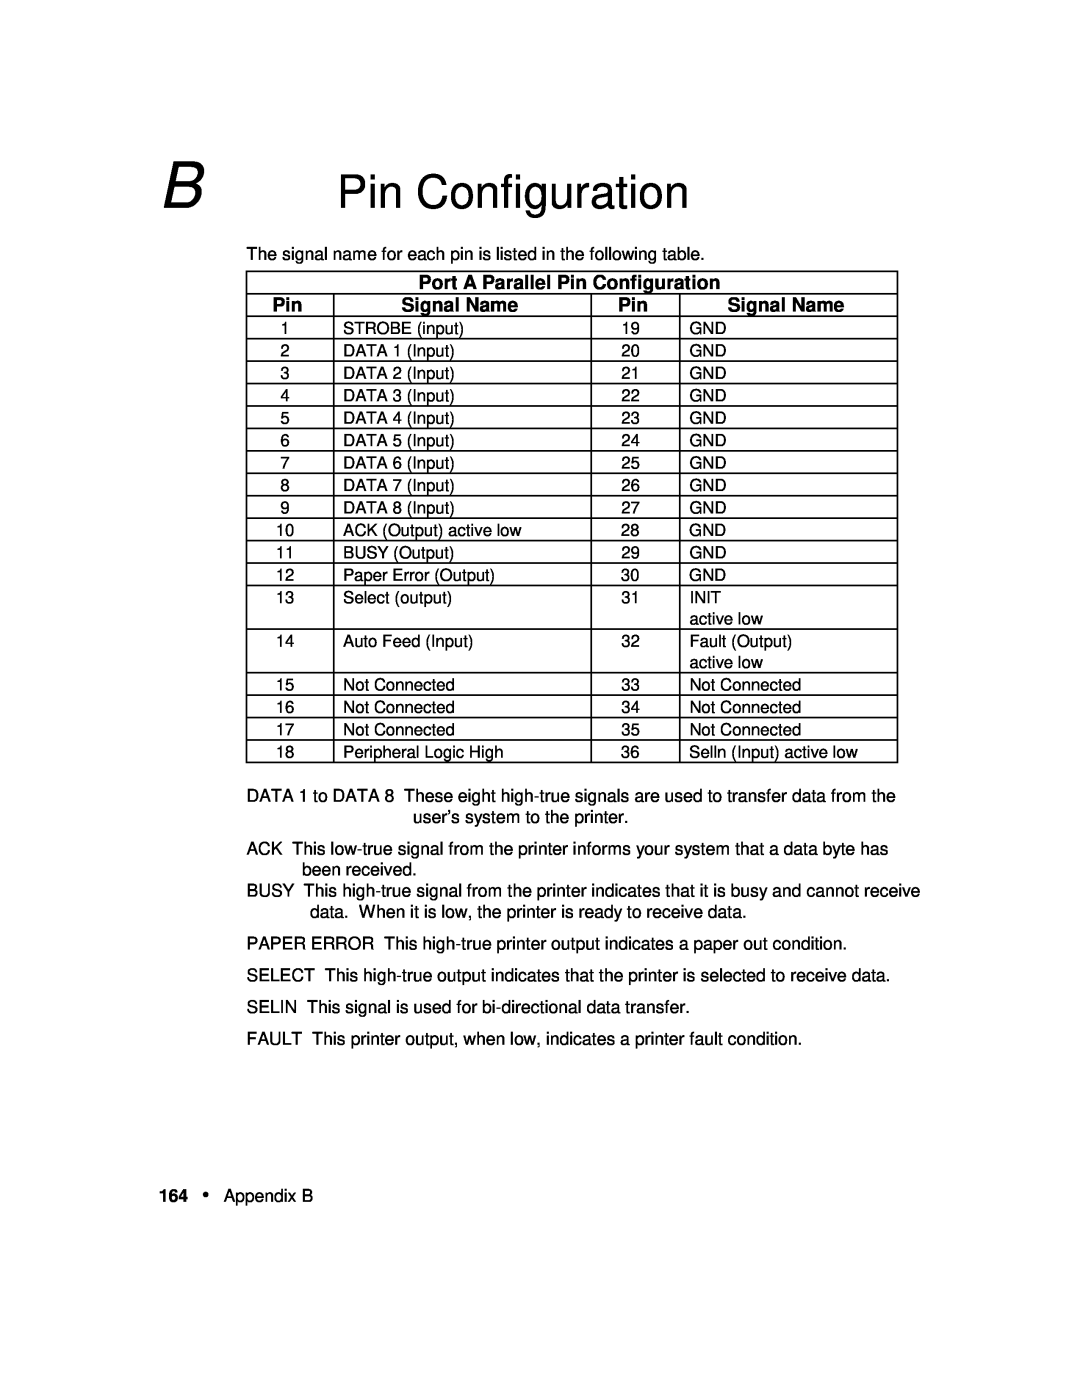 Xerox P12 manual Port A Parallel Pin Configuration, Signal Name 